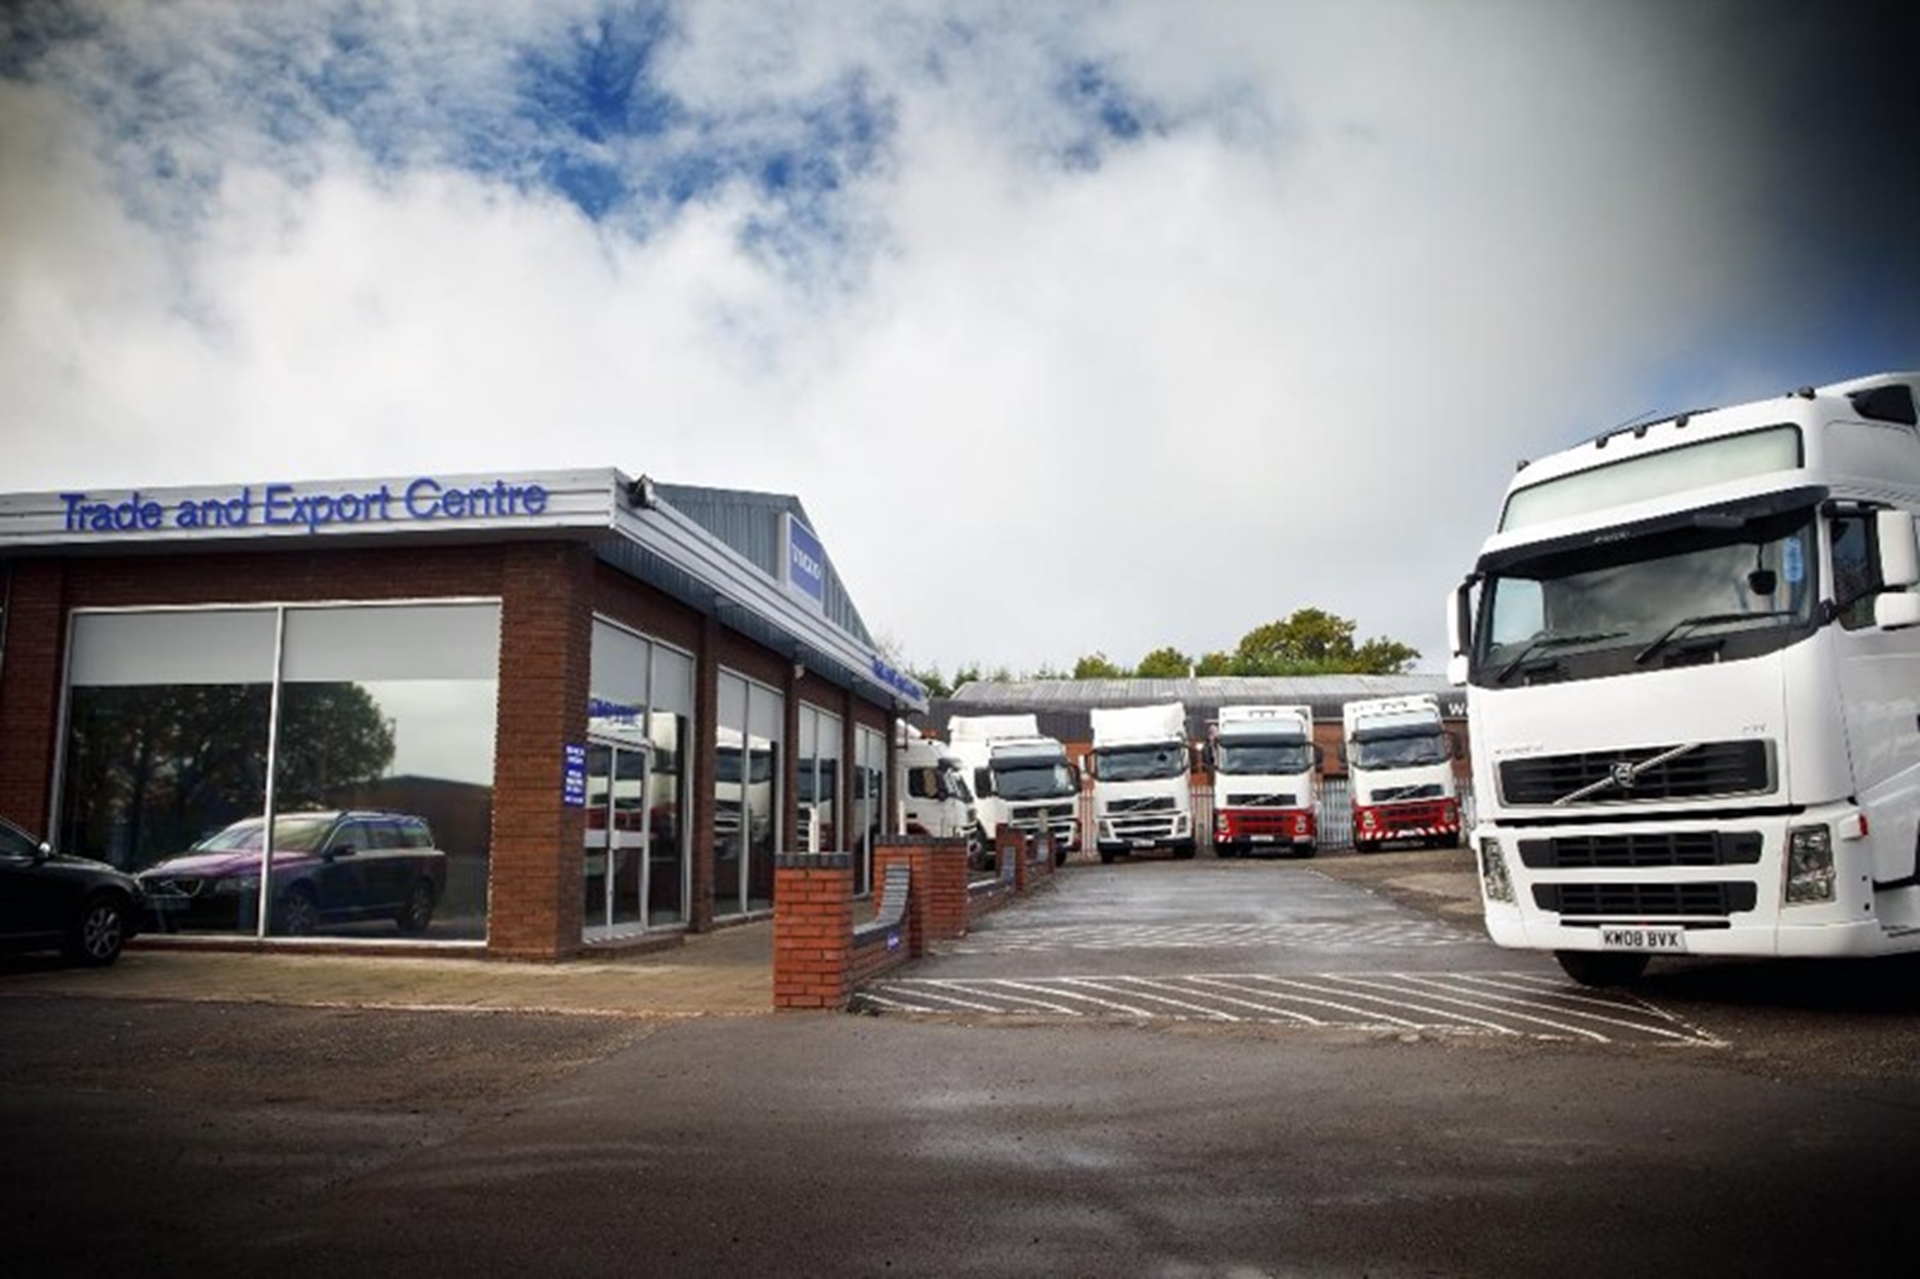 VOLVO USED TRUCK OPENS TRADE AND EXPORT CENTRE IN COVENTRY